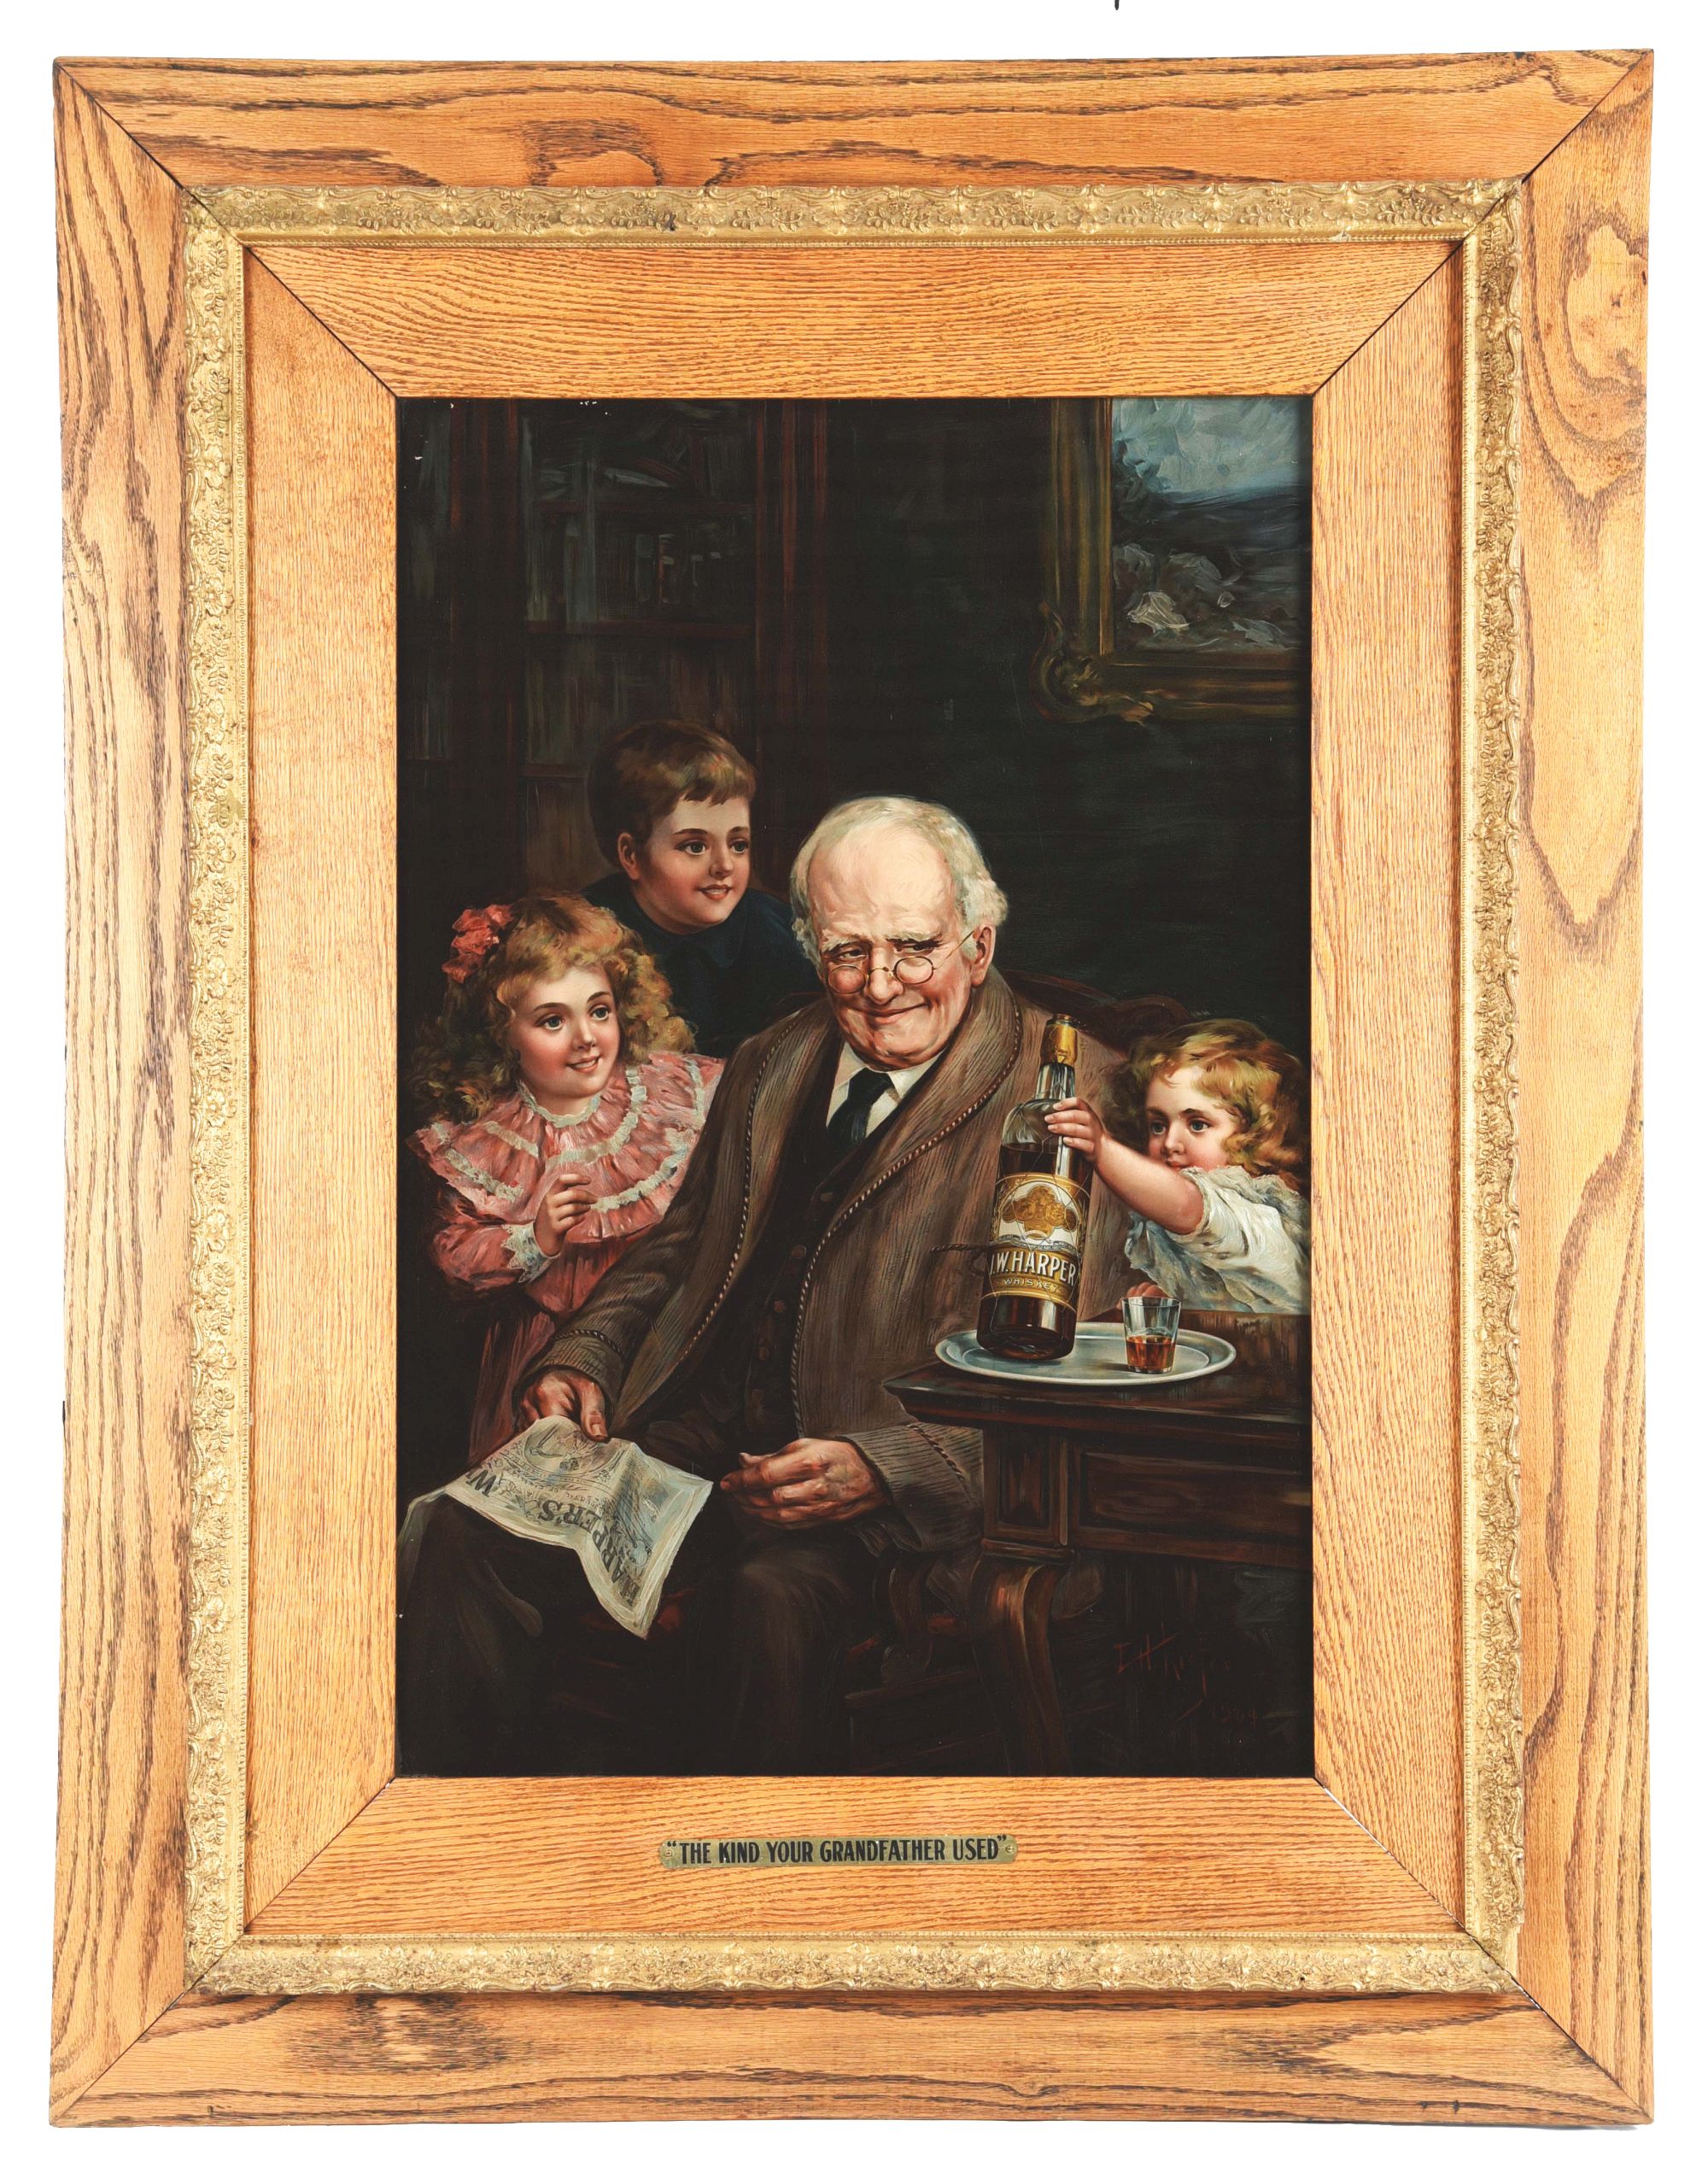 Classic J.W. Harper Whiskey framed advertising sign with slogan ‘THE KIND YOUR GRANDFATHER USED.’ Framed size: 52¾ x 40¾in. Investment-grade condition. Estimate $5,000-$15,000